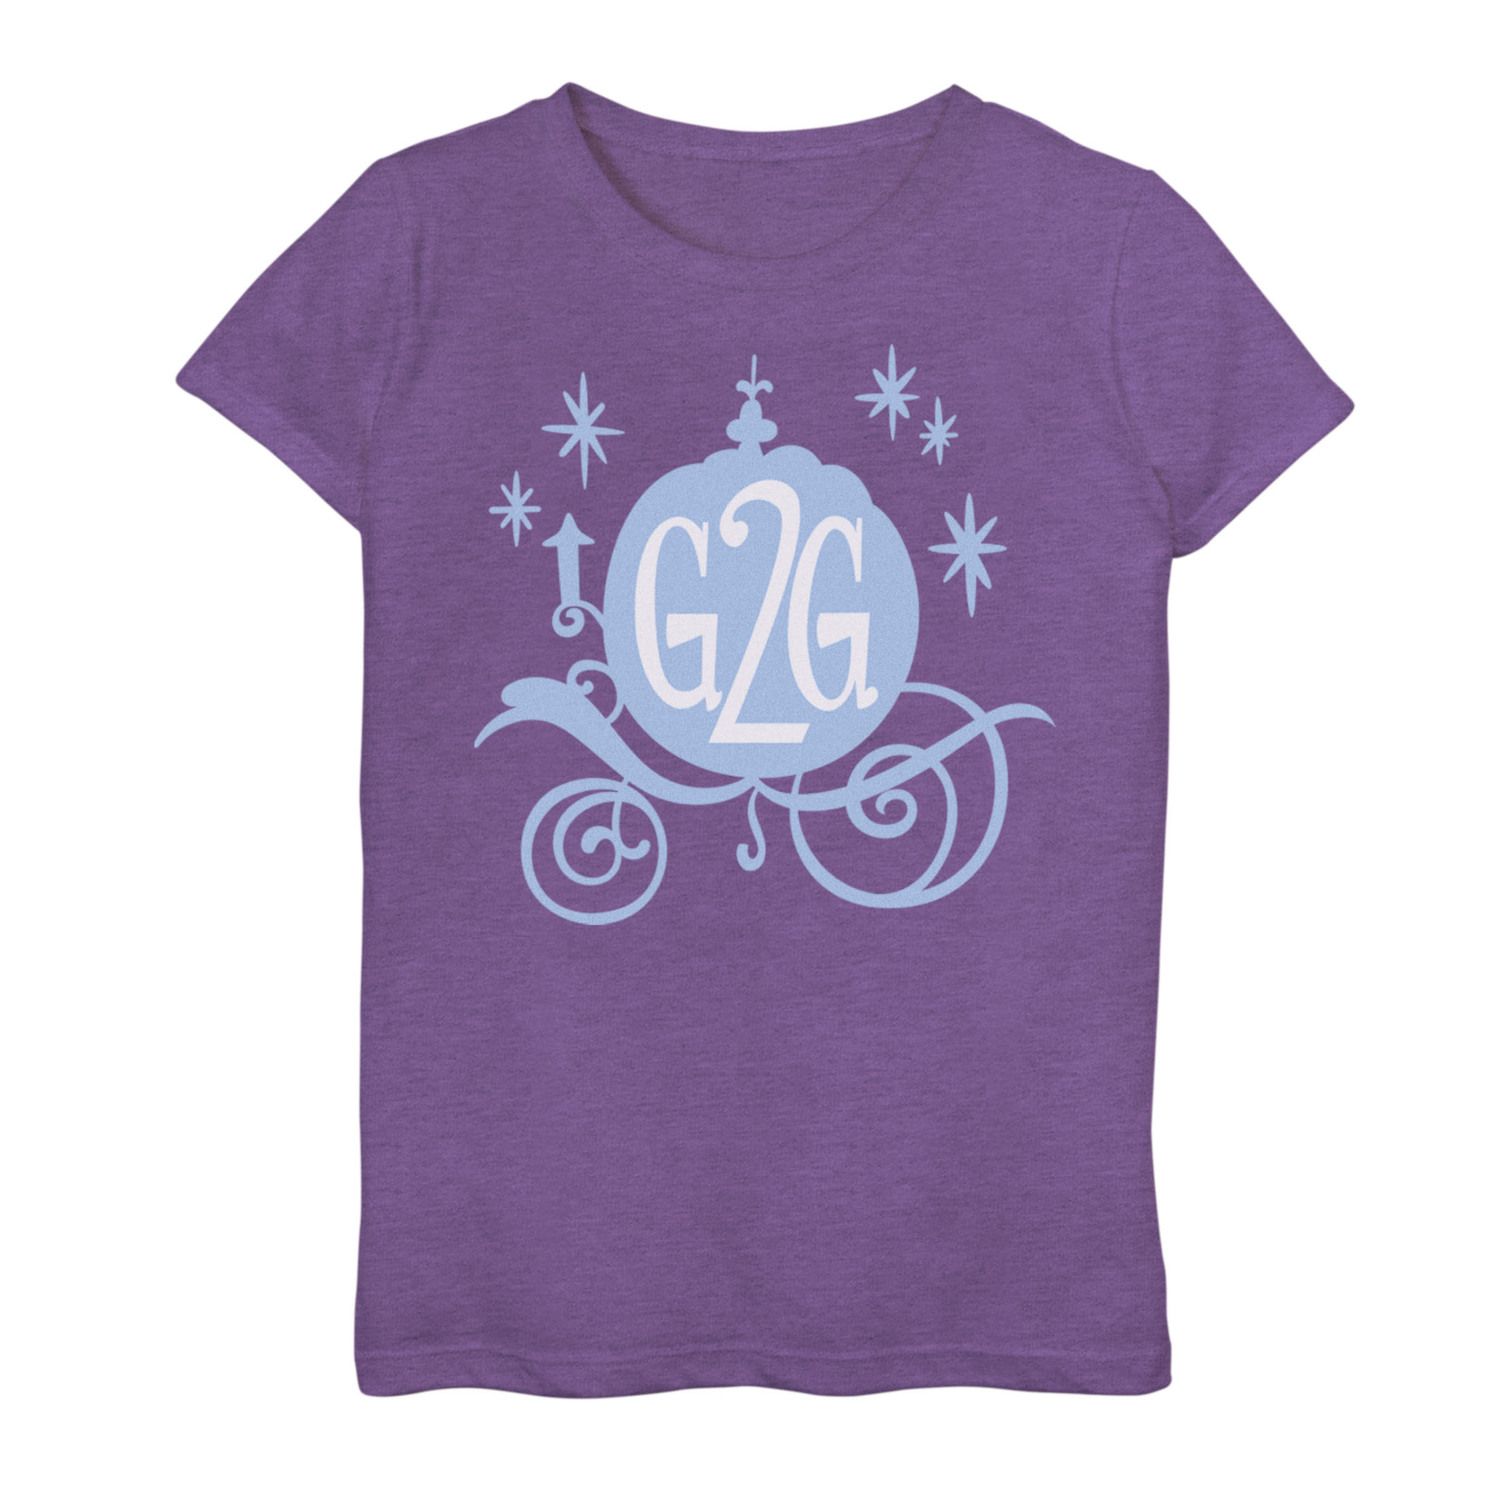 Image for Disney 's Wreck It Ralph 2 Girls 7-16 Comfy Princess Cinderella G2G Graphic Tee at Kohl's.